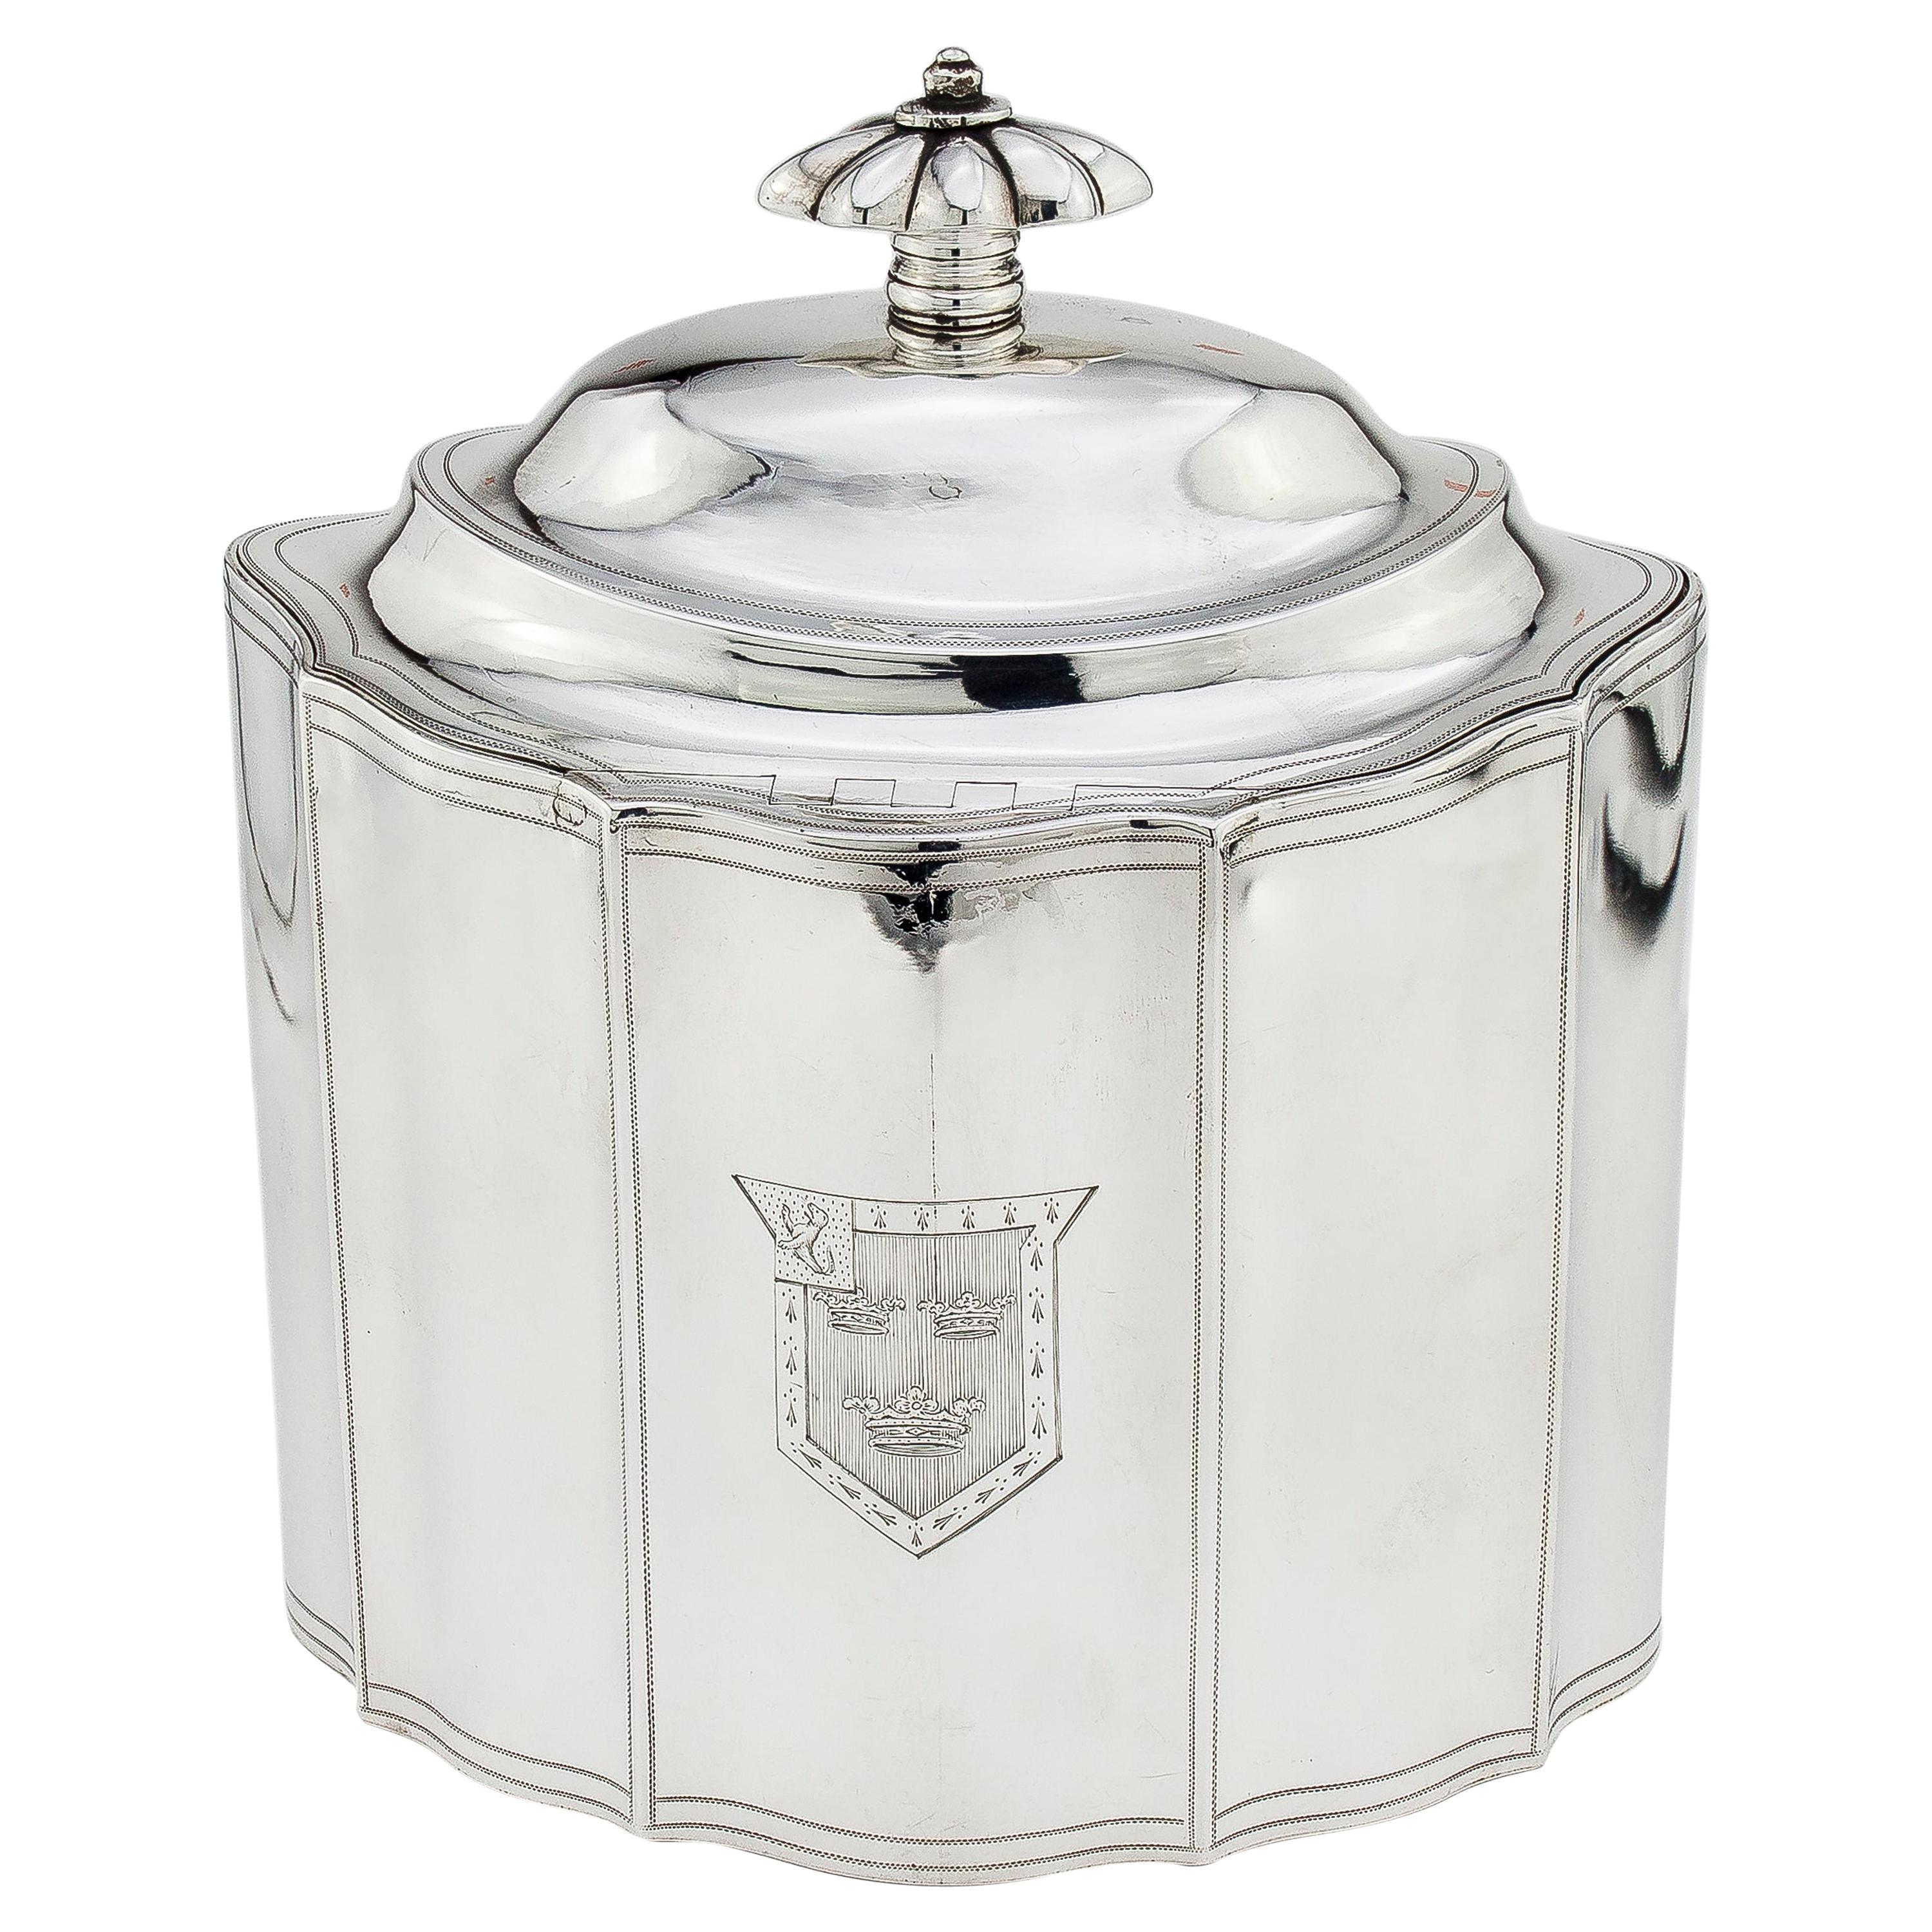 Antique Georgian Sterling Silver Tea Caddy with Coat of Arms, London, 1796